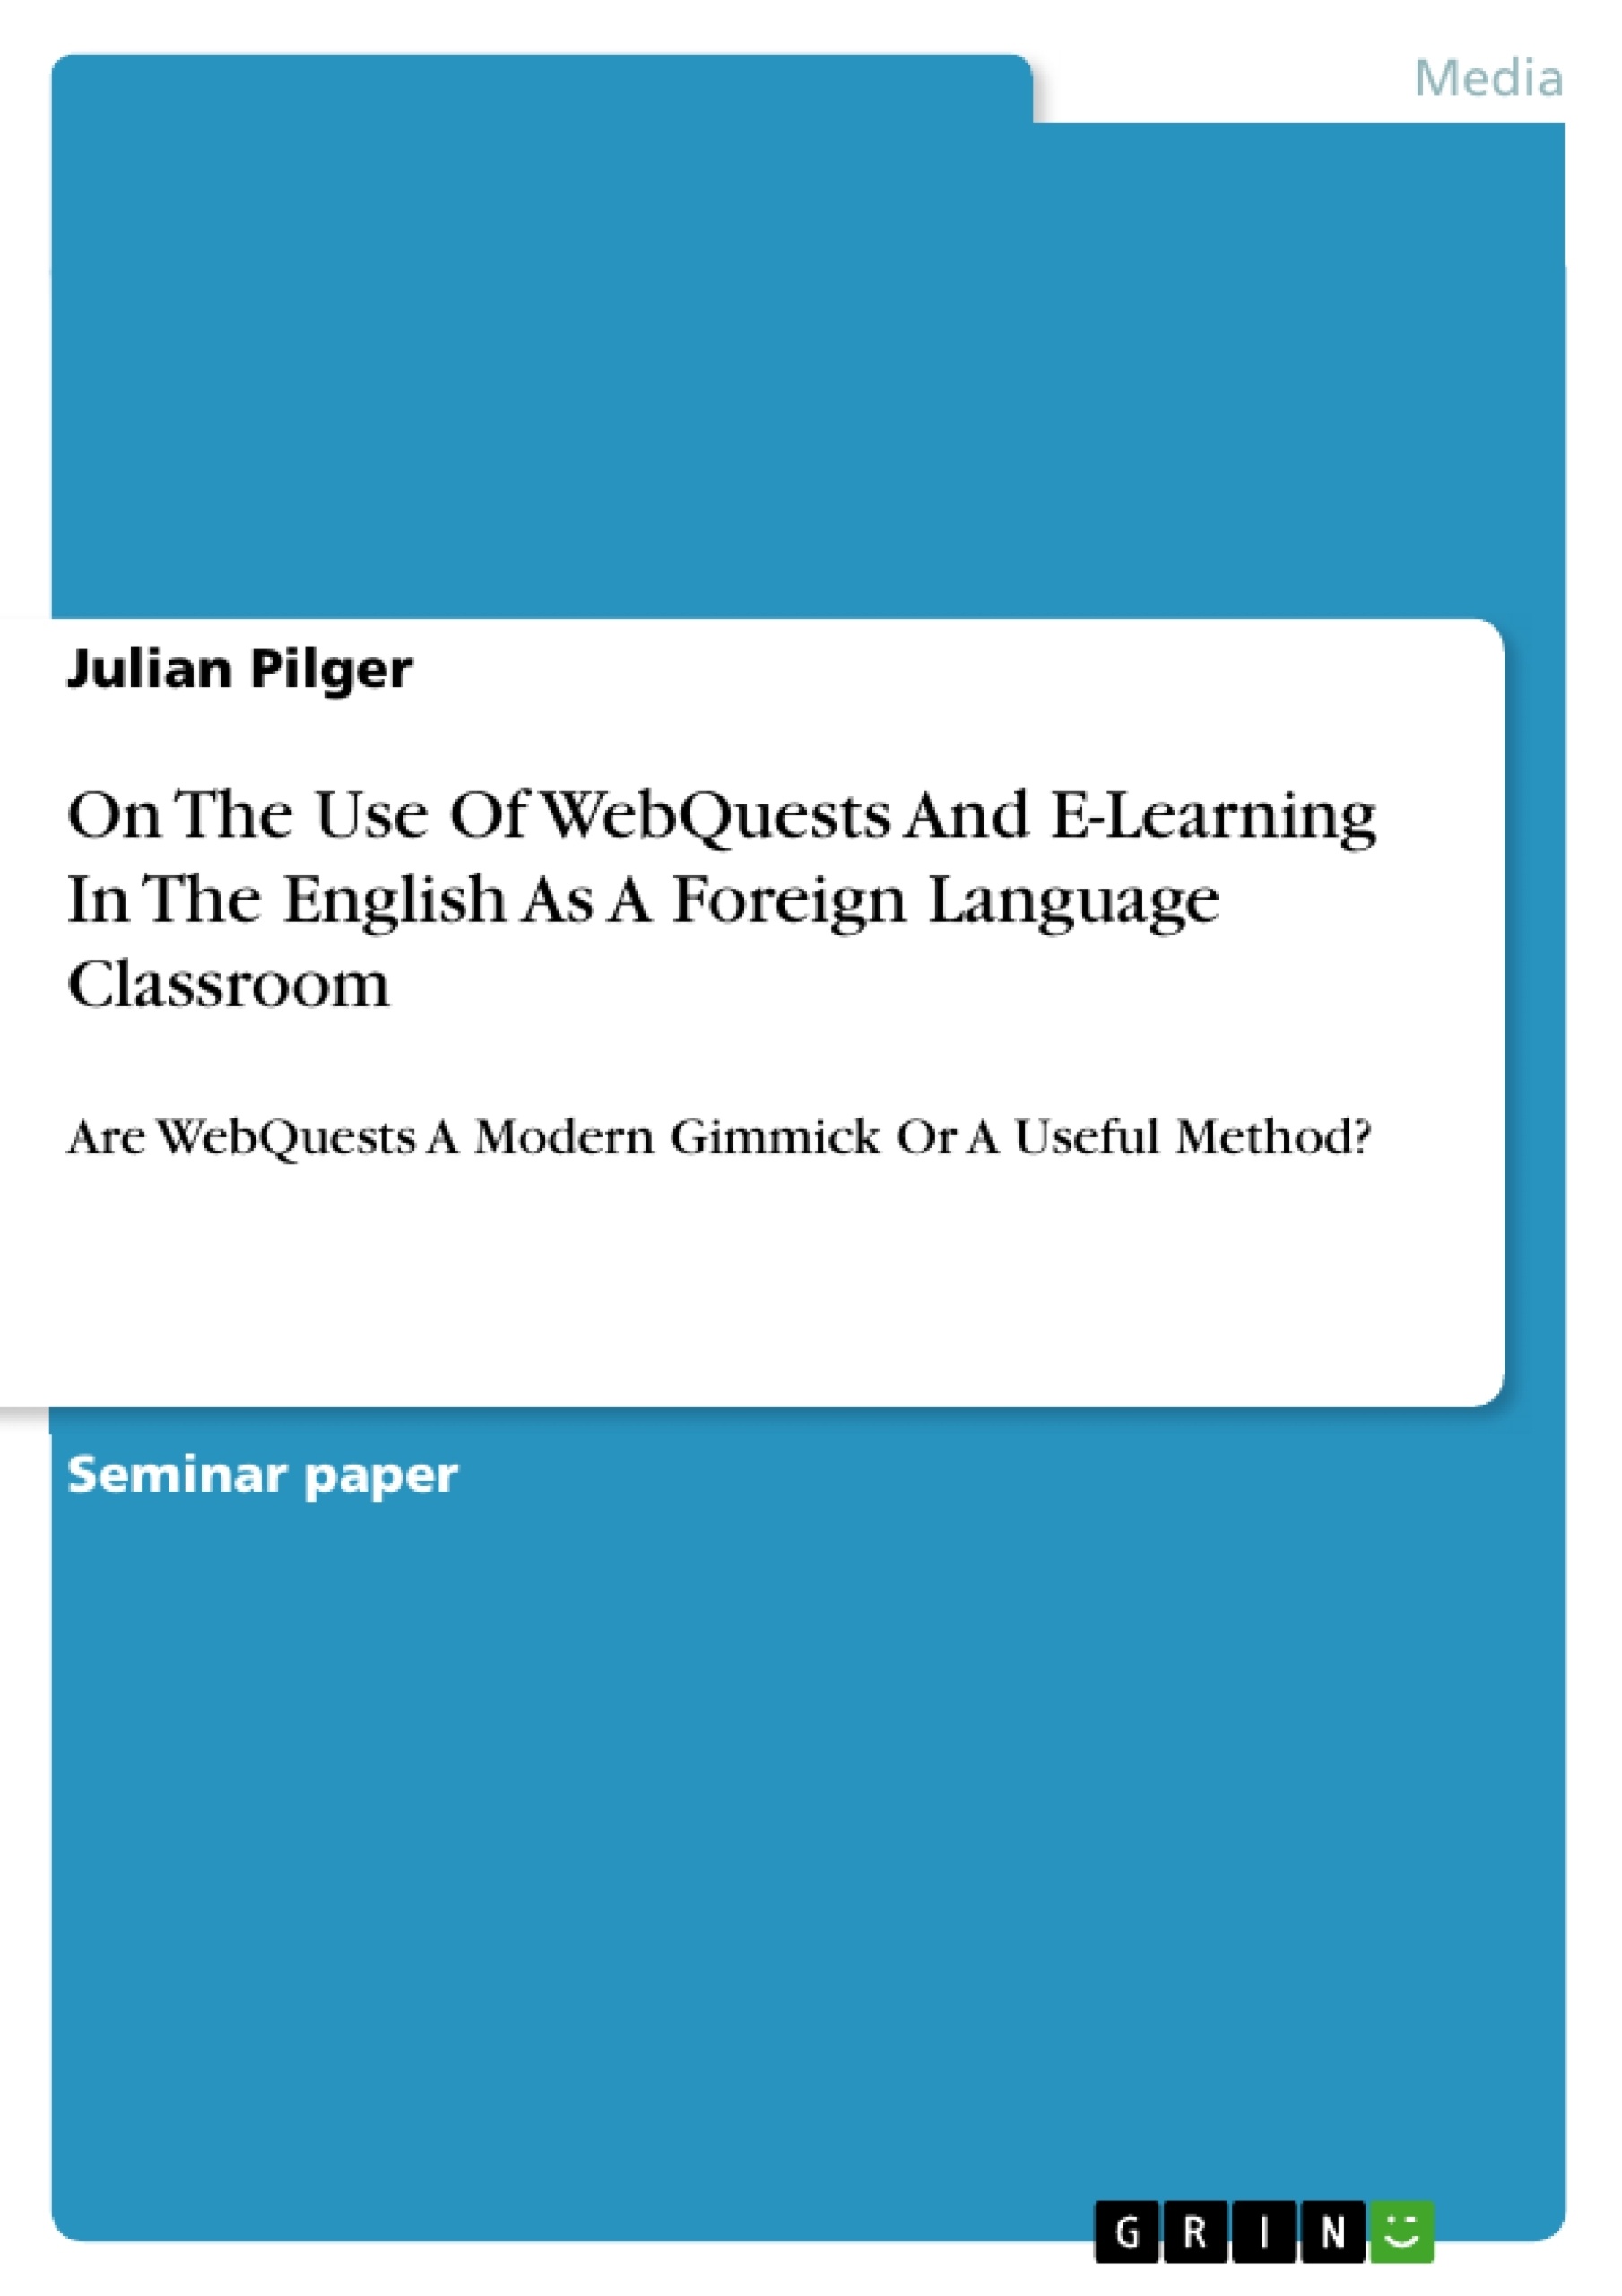 Titre: On The Use Of WebQuests And E-Learning In The English As A Foreign Language Classroom